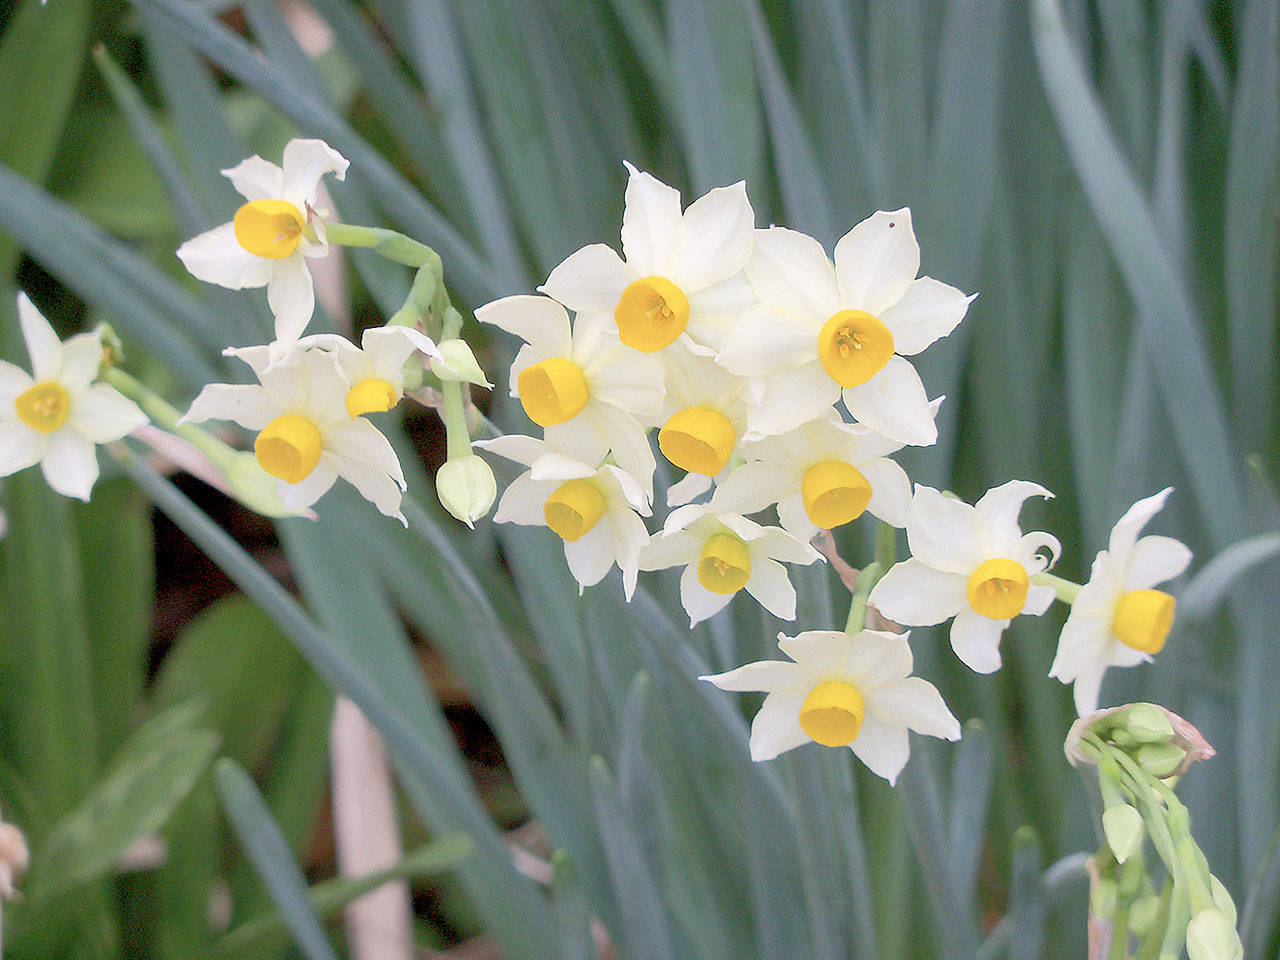 Wylie-Young photo                                Jonquil stems are hollow and usually shorter than daffodil varieties. They tend to have clusters of flowers on the stems and a delicate fragrance. Jonquils have slender leaves that round on the tips, while daffodils show off slim, sword-tipped foliage.